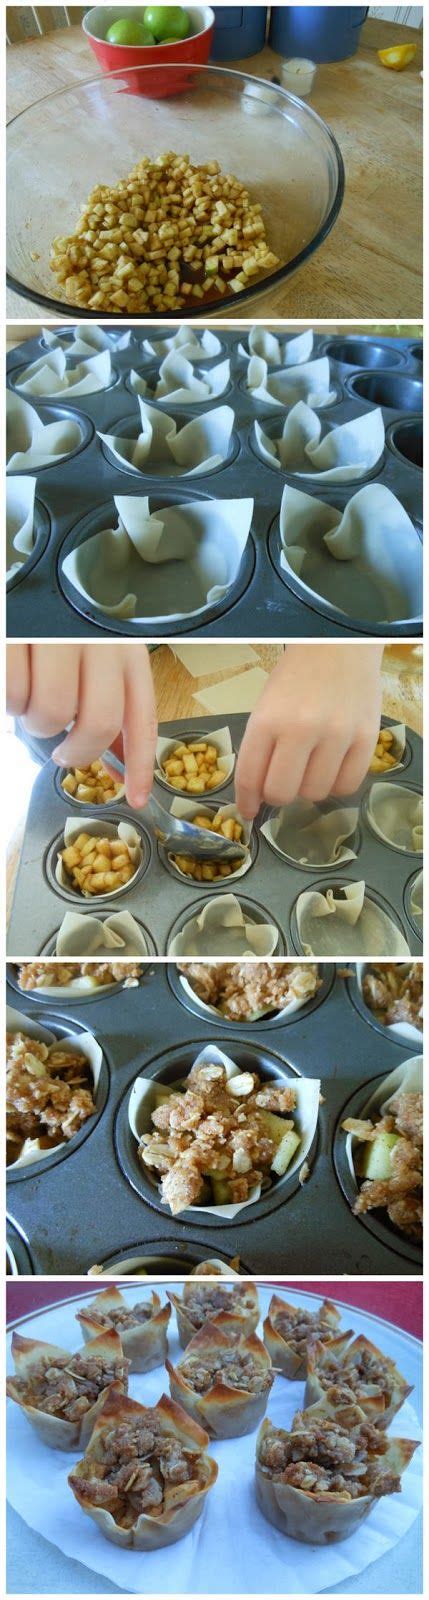 As an ingredient, wonton wrappers are relatively inexpensive, easy to locate, and versatile. Best of Recipe: Mini Apple Pies with Wonton Wrappers (With images) | Dessert recipes, Healthy ...